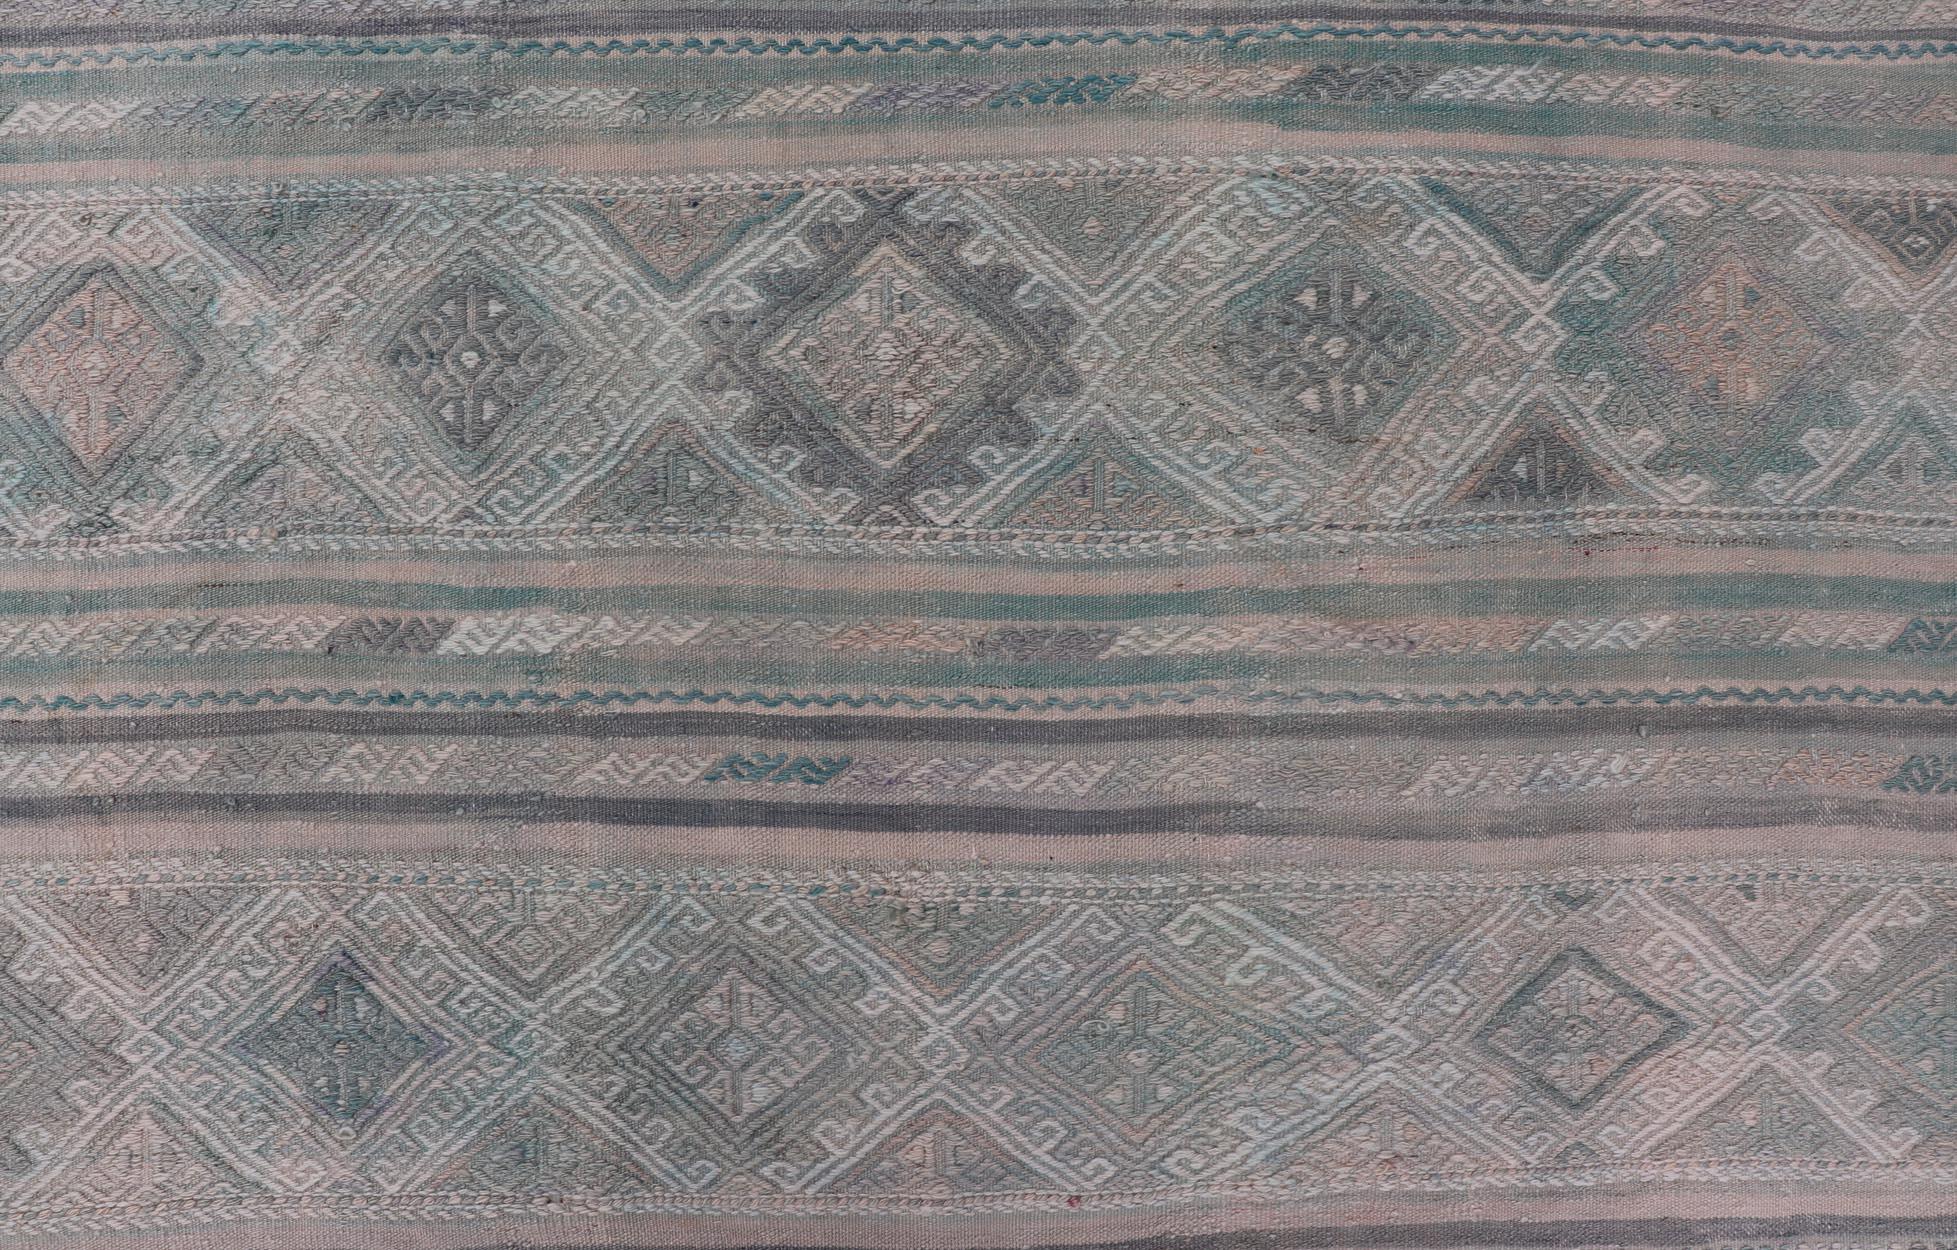 Turkish Vintage Kilim Flat-Weave with Embroideries Kilim in Pastel Color For Sale 4